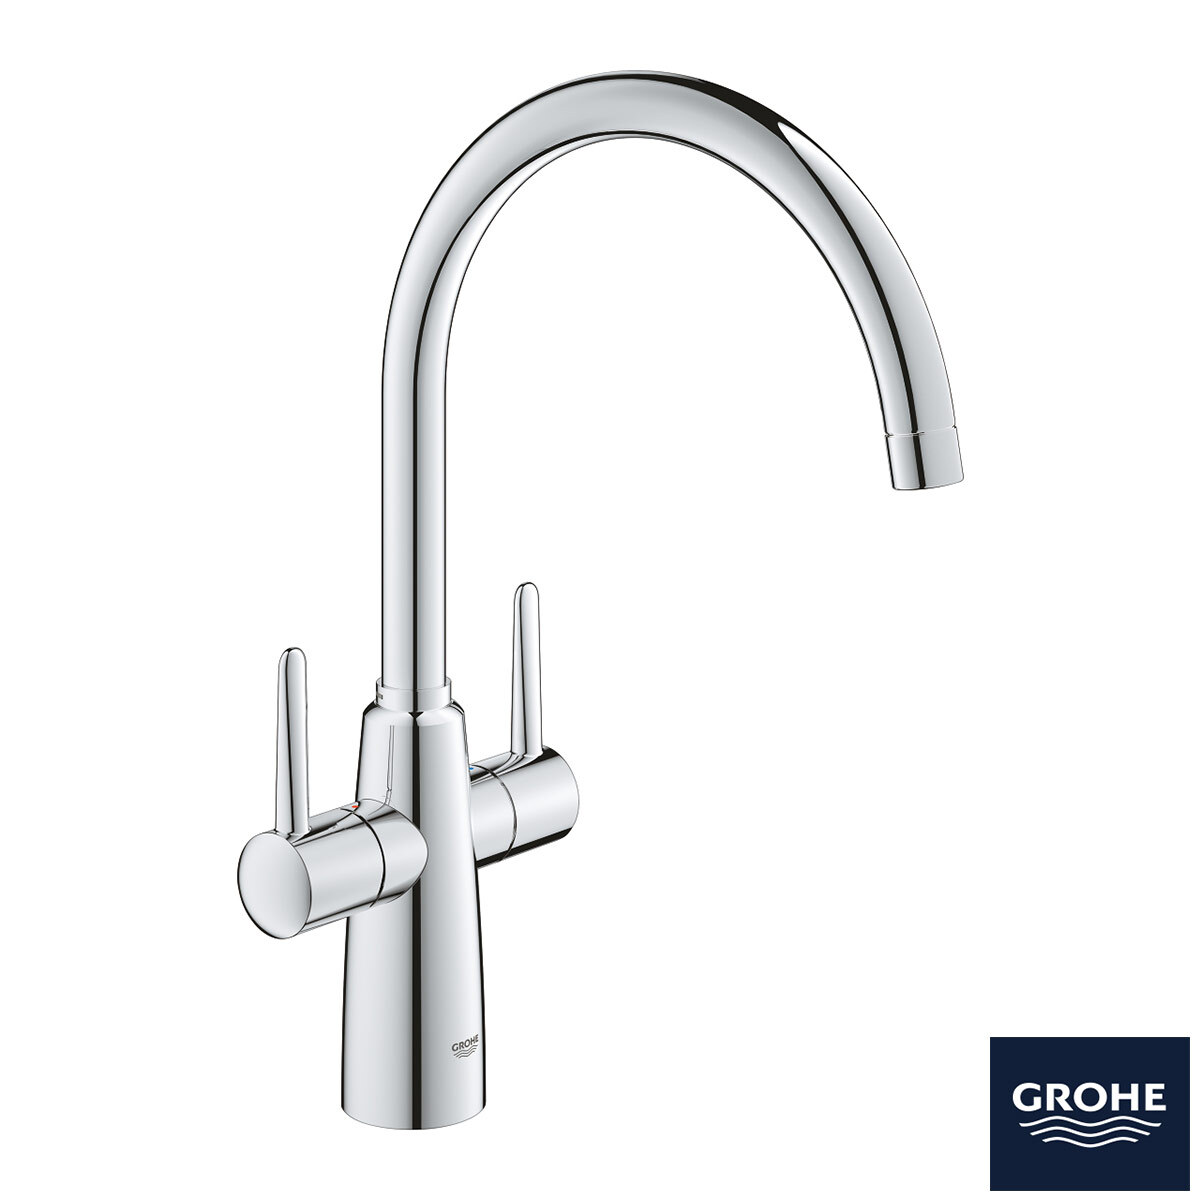 Cut out image of GROHE tap on white background